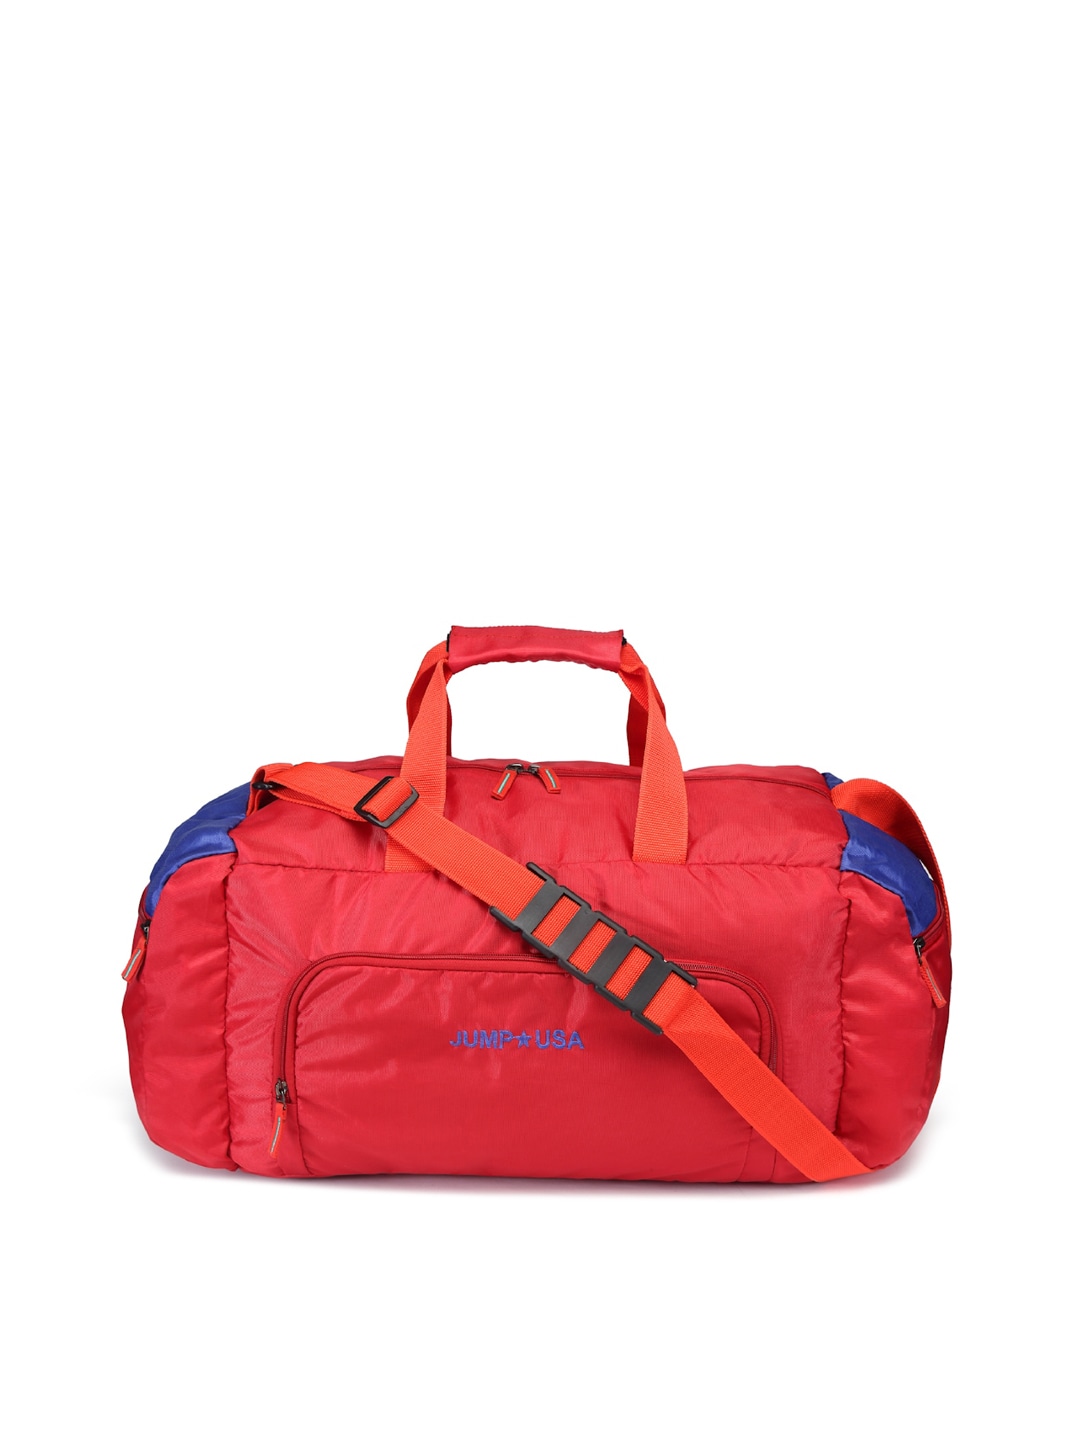 JUMP USA Red & Royal Blue Color-Blocked Duffel Bag Price in India